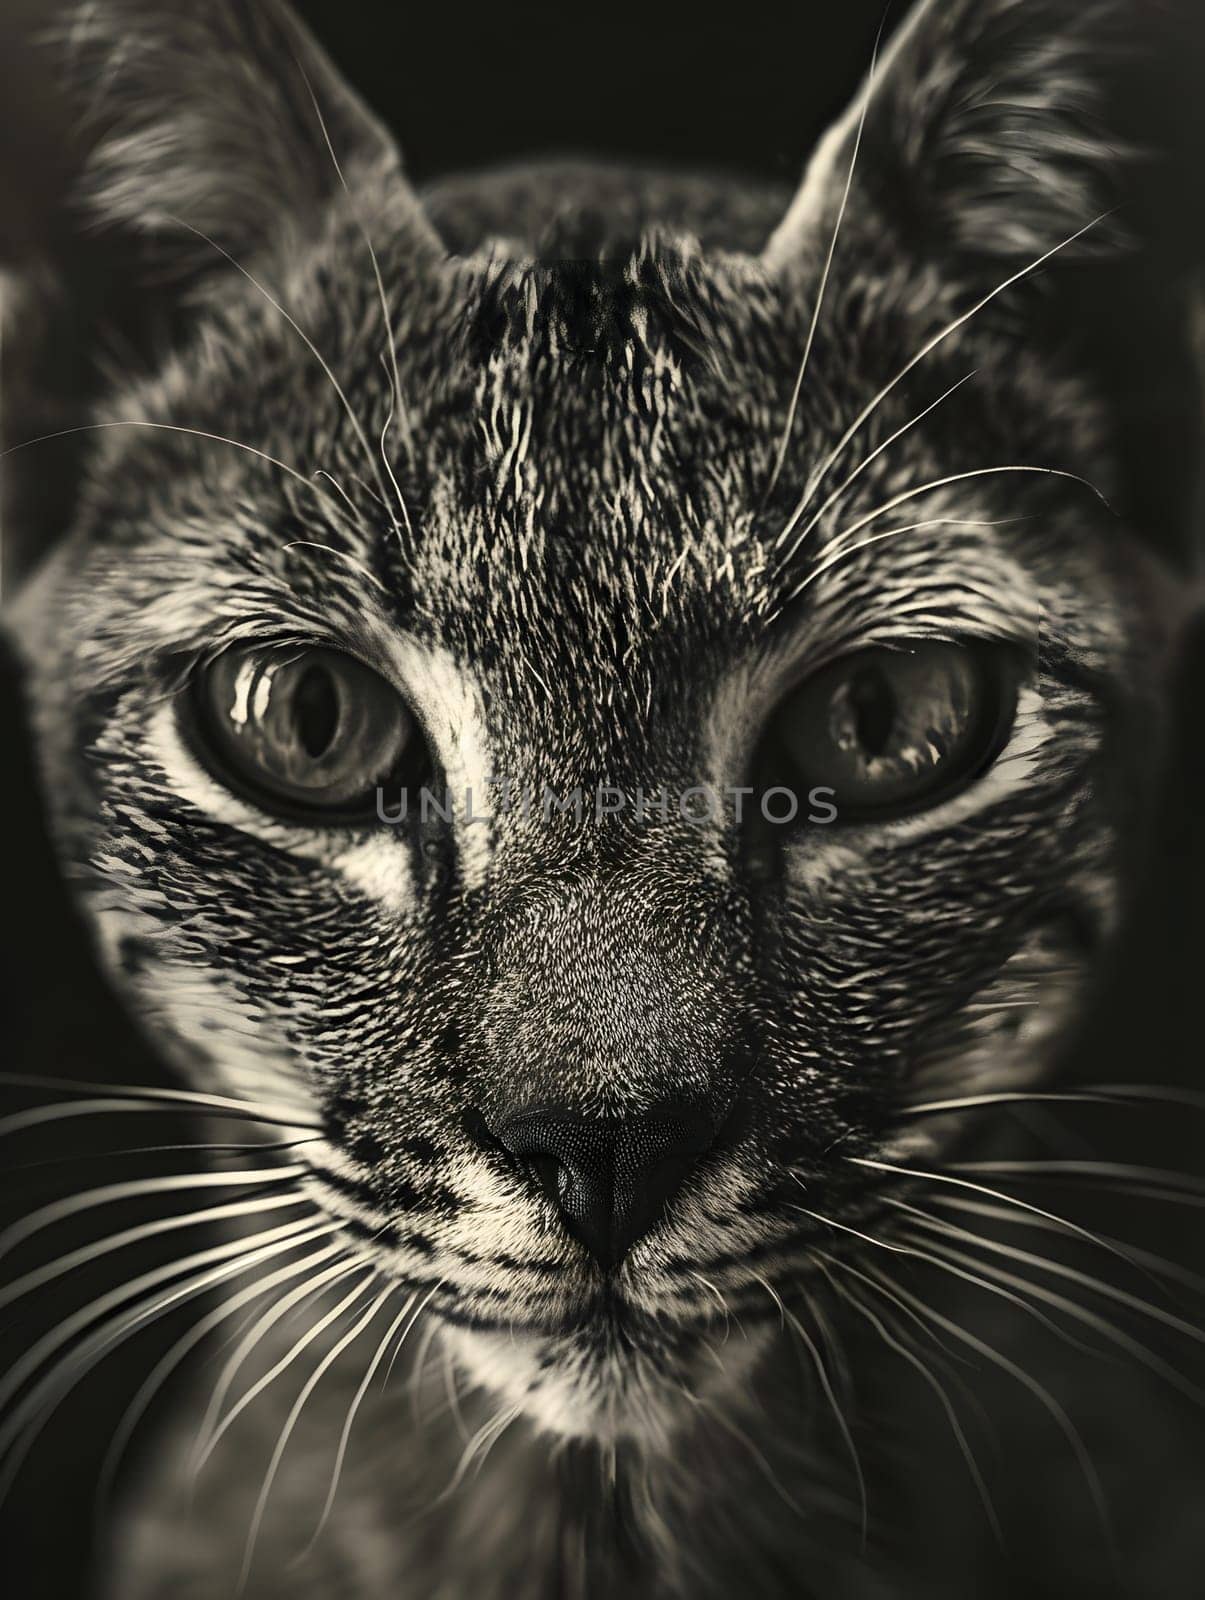 Monochrome photo of a Felidaes head with striking iris and whiskers by Nadtochiy